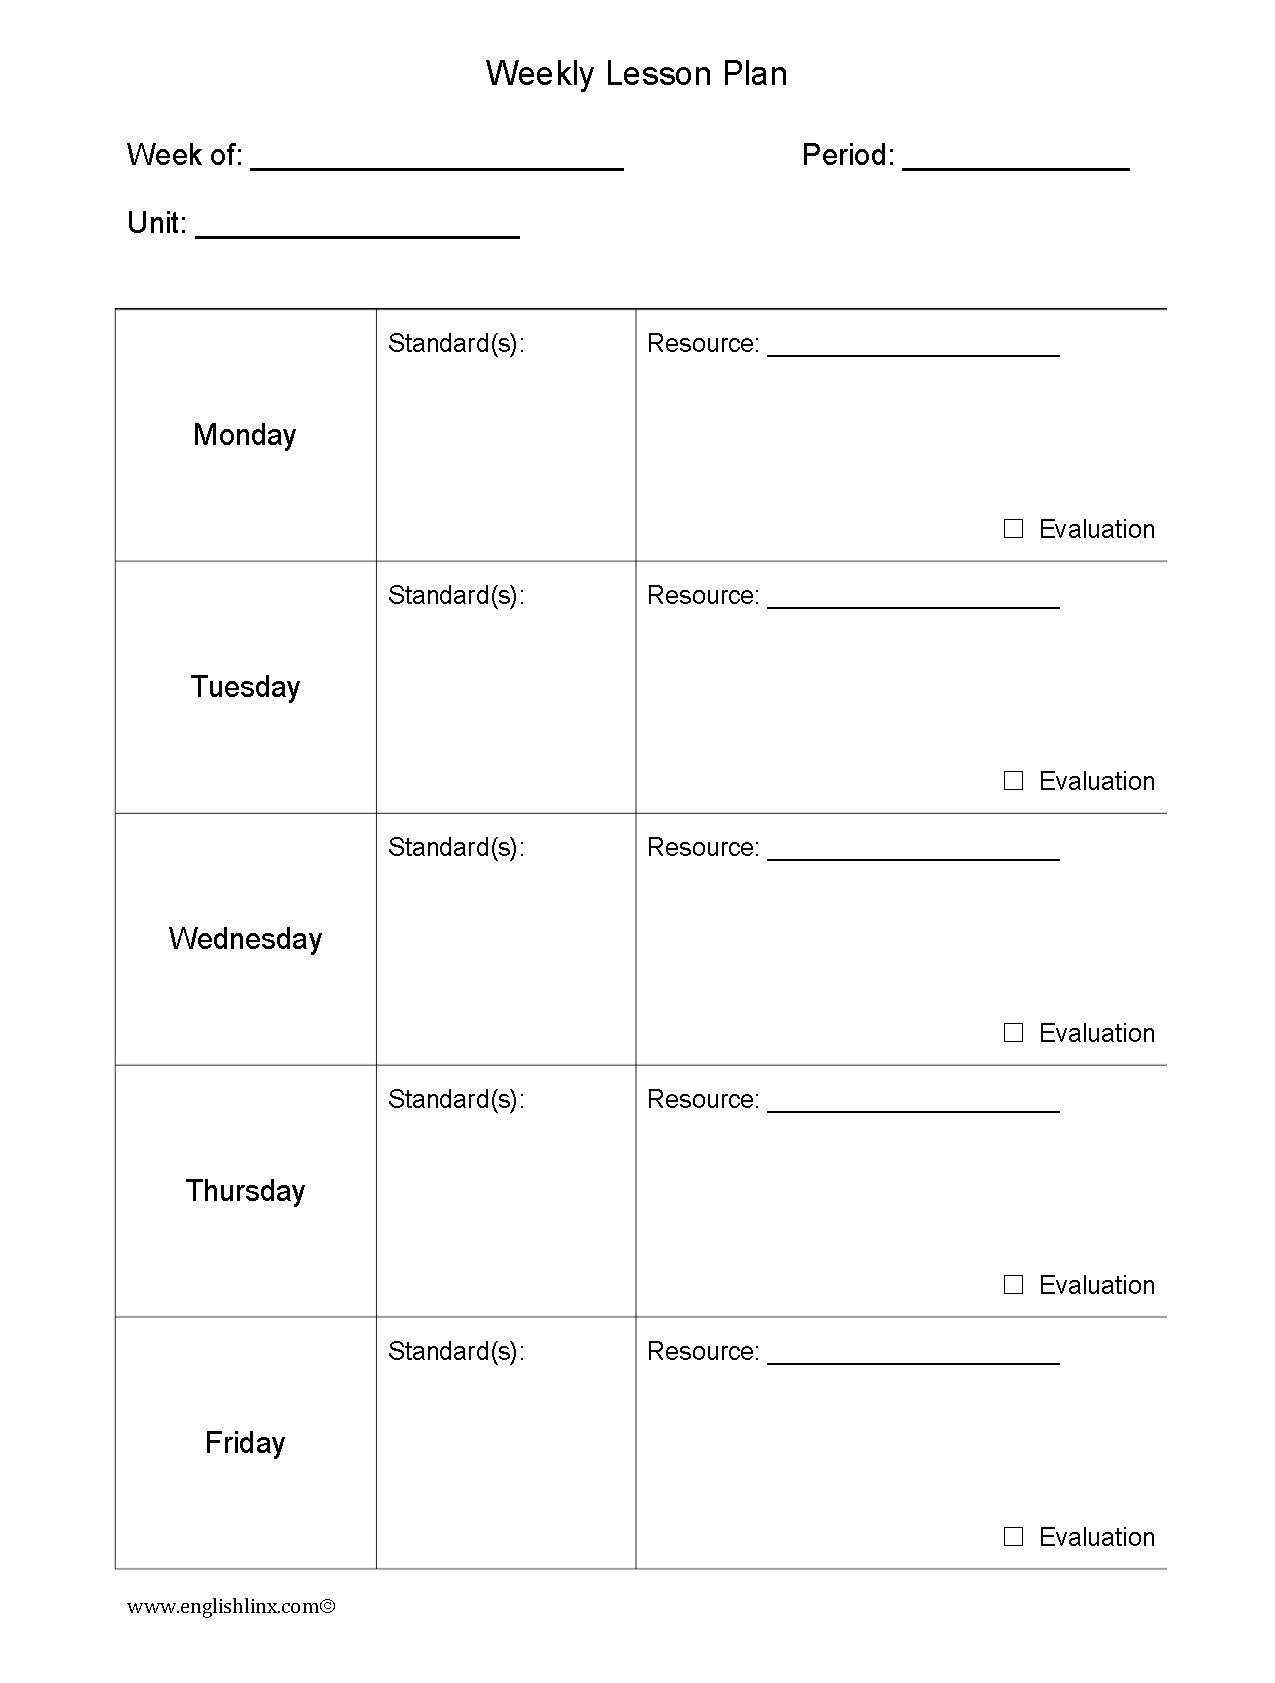 Lesson Plan Template | Fun Weekly Lesson Plan Template